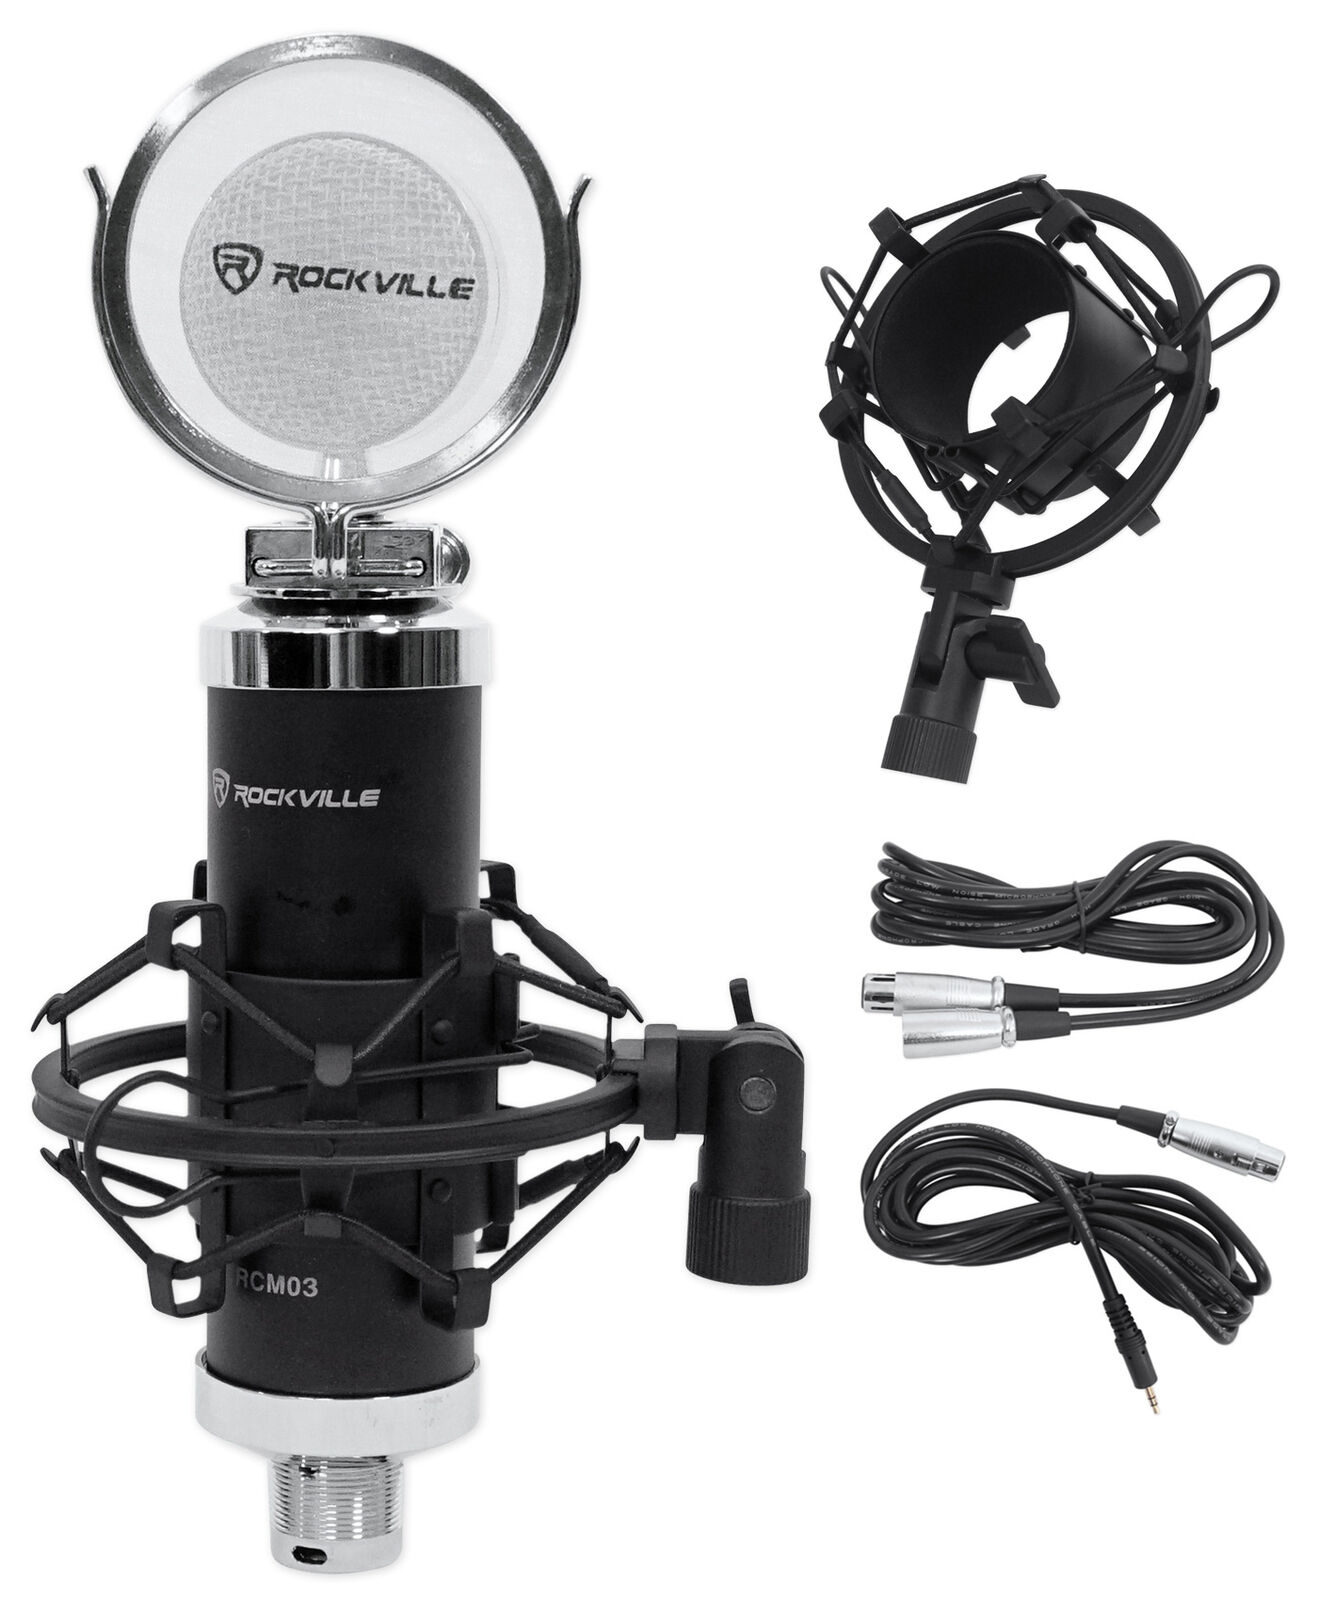 Rockville RCM03 Pro Recording Condenser Podcasting Podcast Microphone Mic